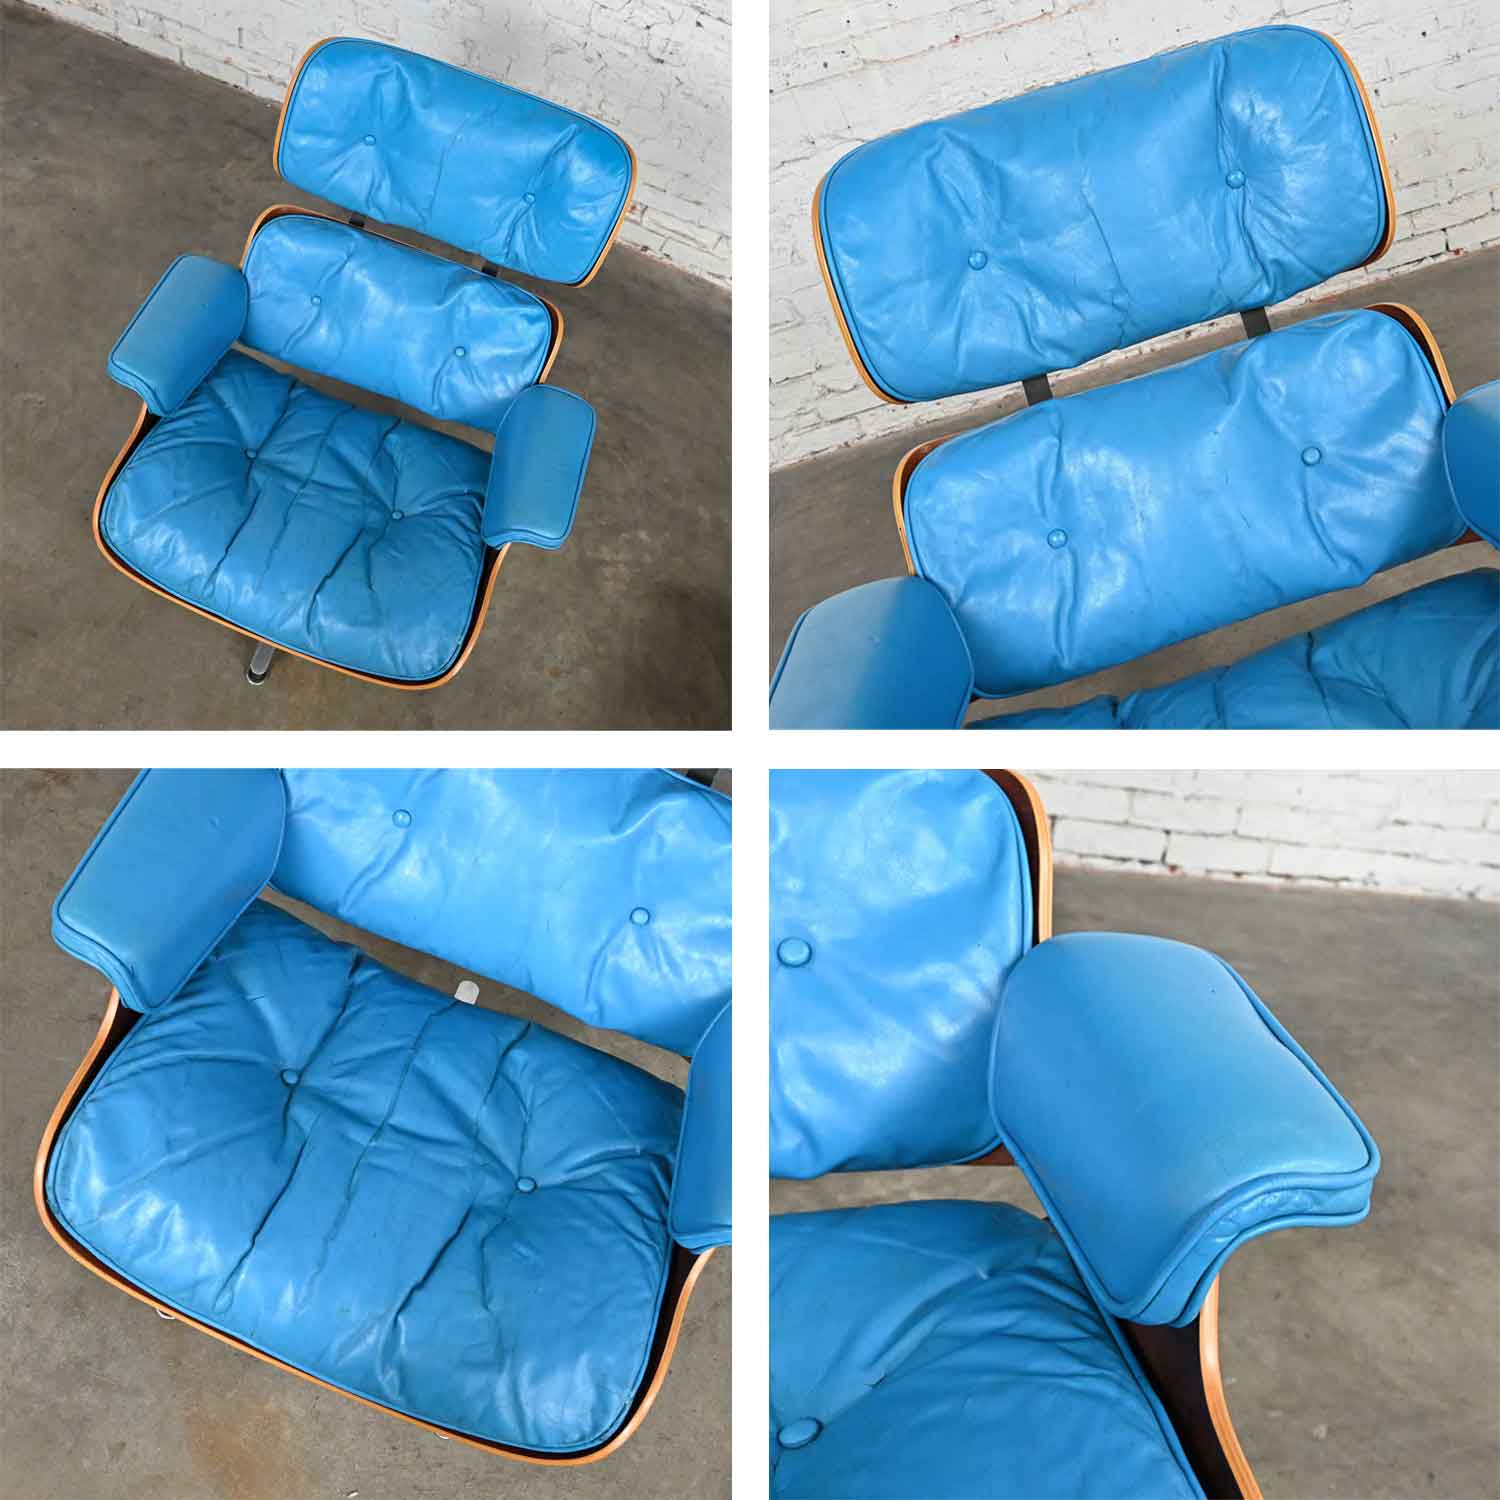 Vintage Eames 670 Lounge Chair & 671 Ottoman in Blue Leather & Walnut & Rosewood for Herman Miller